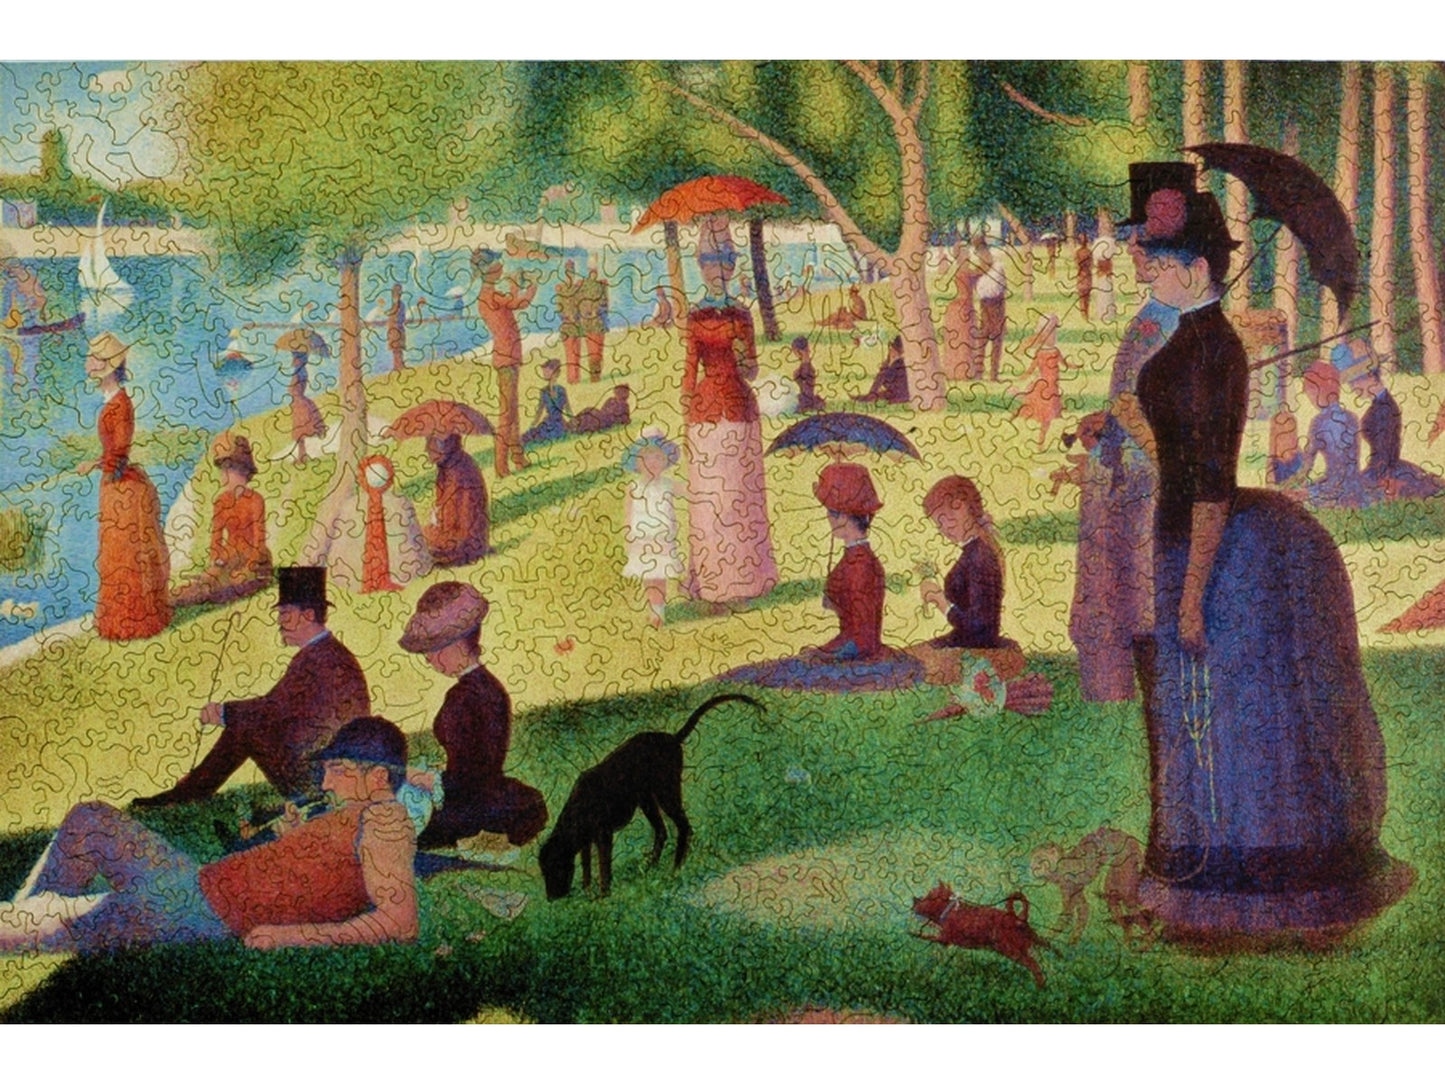 The front of the puzzle, A Sunday on La Grande Jatte, which shows people relaxing in a park on a riverbank.